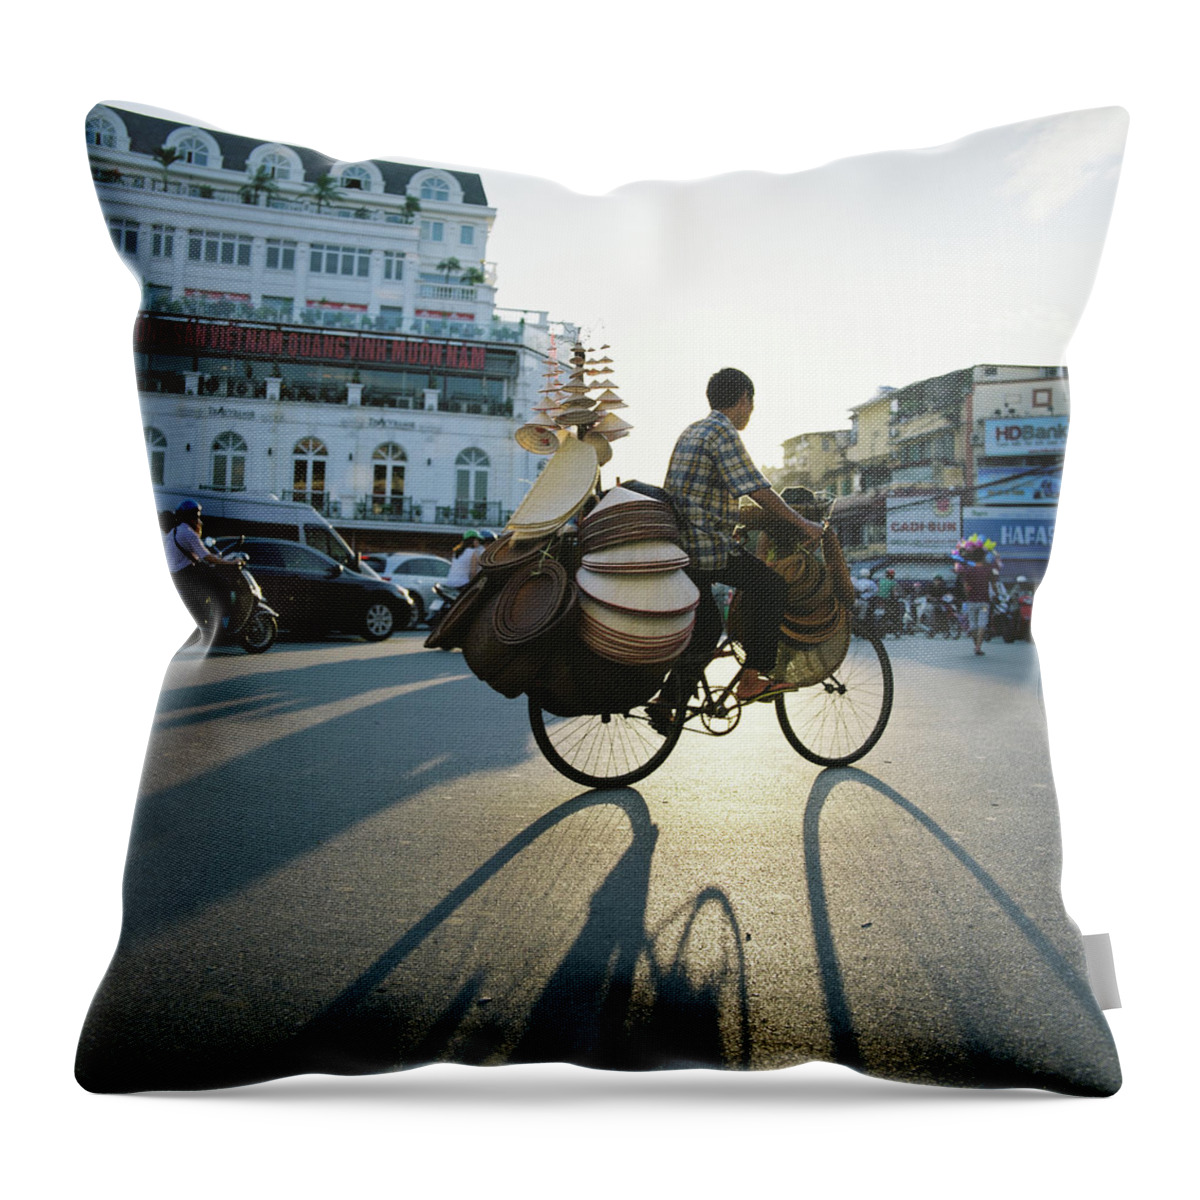 People Throw Pillow featuring the photograph Street by Duc sla